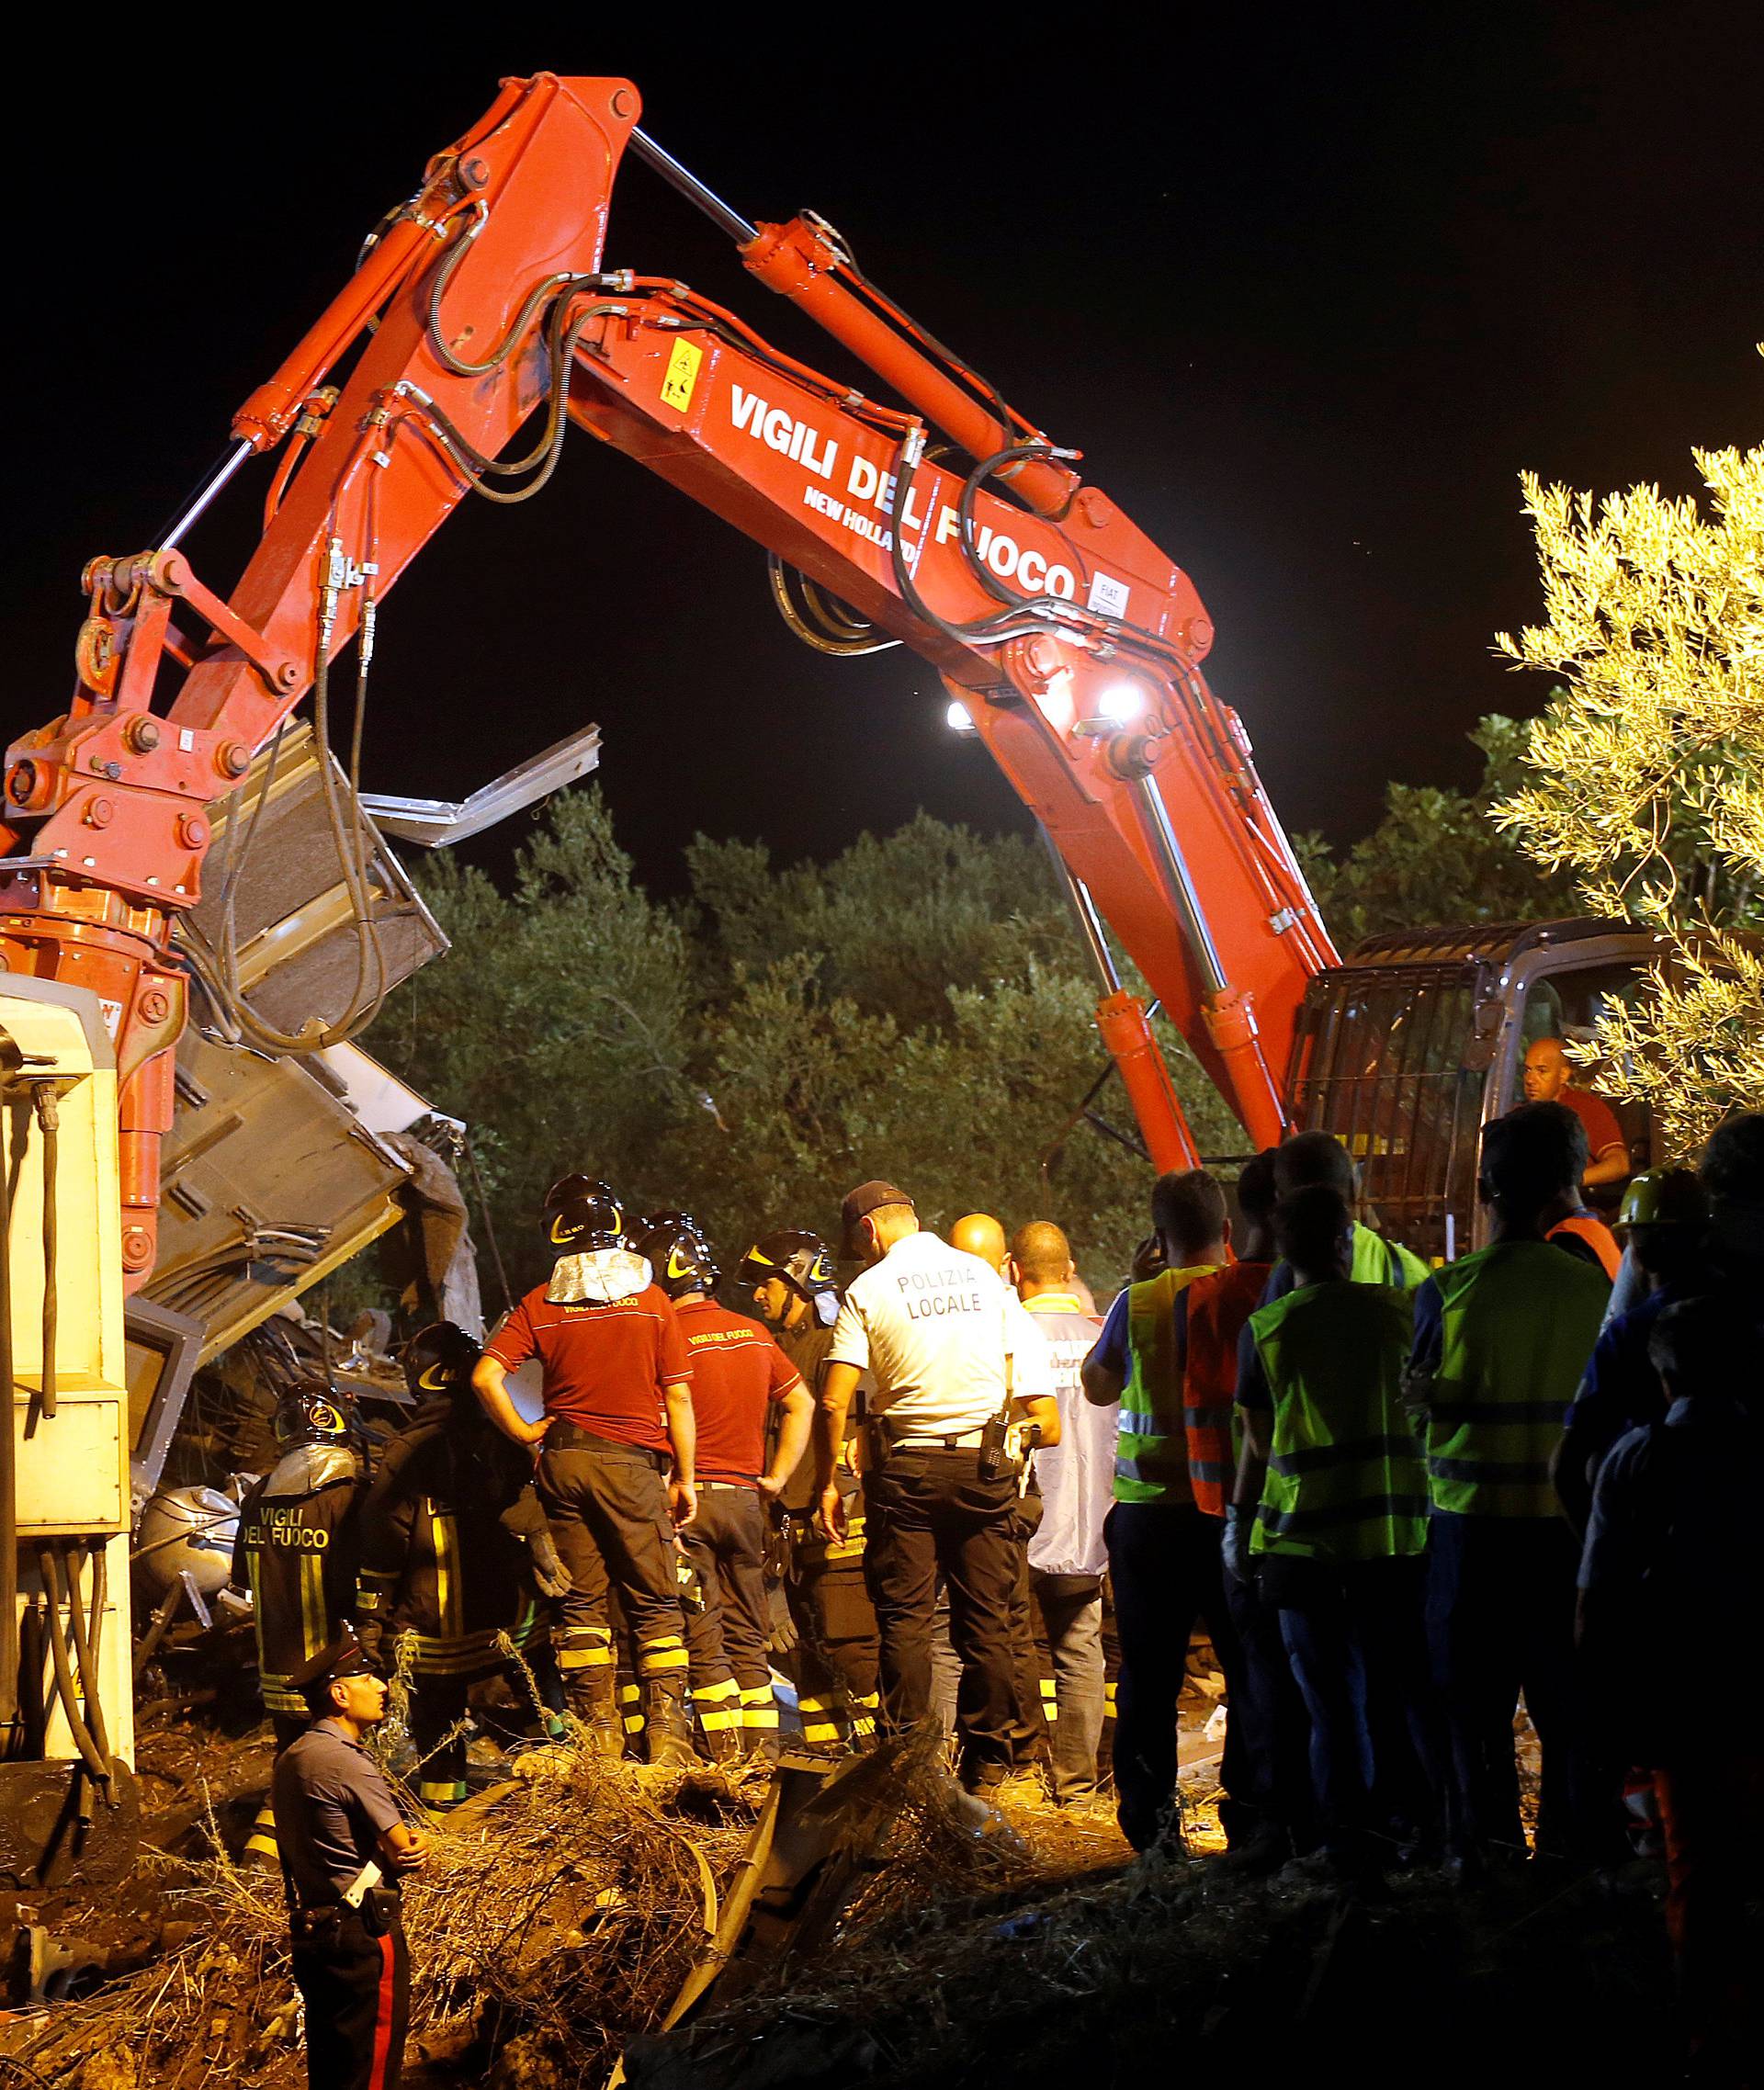 Rescuers work at the site where two passenger trains collided in the middle of an olive grove in the southern village of Corato